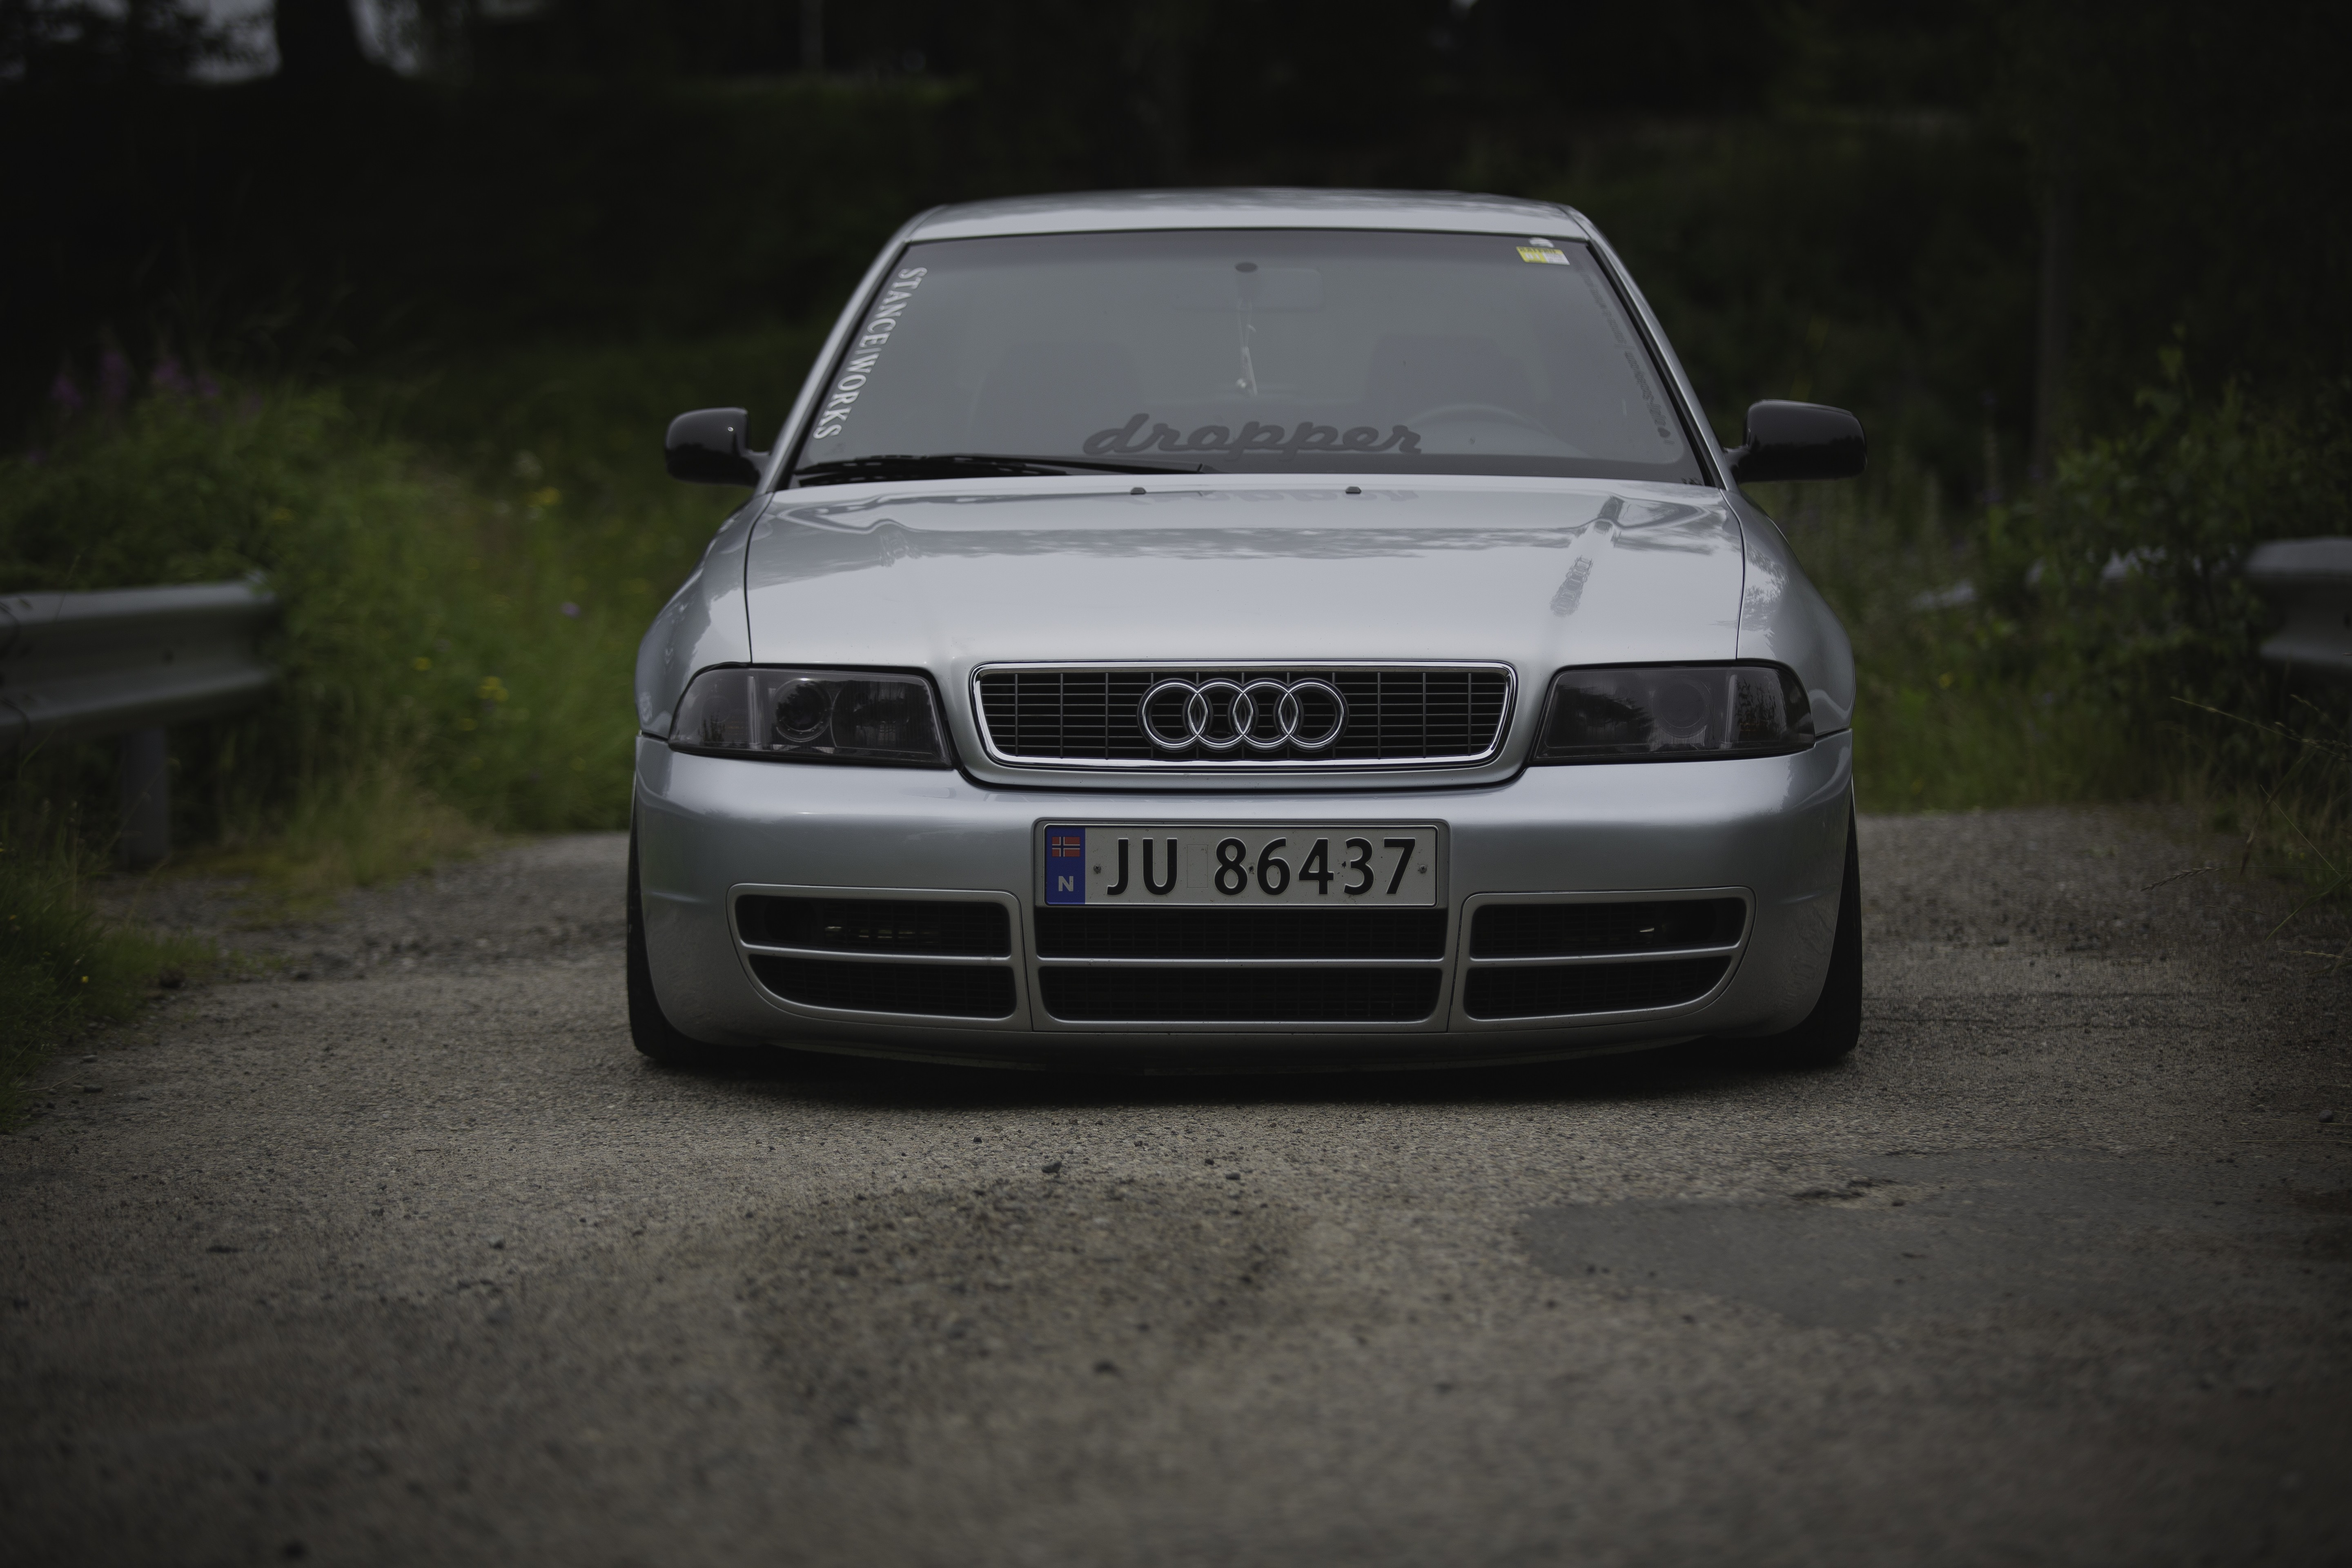 Wallpaper Audi A4 For Mobile